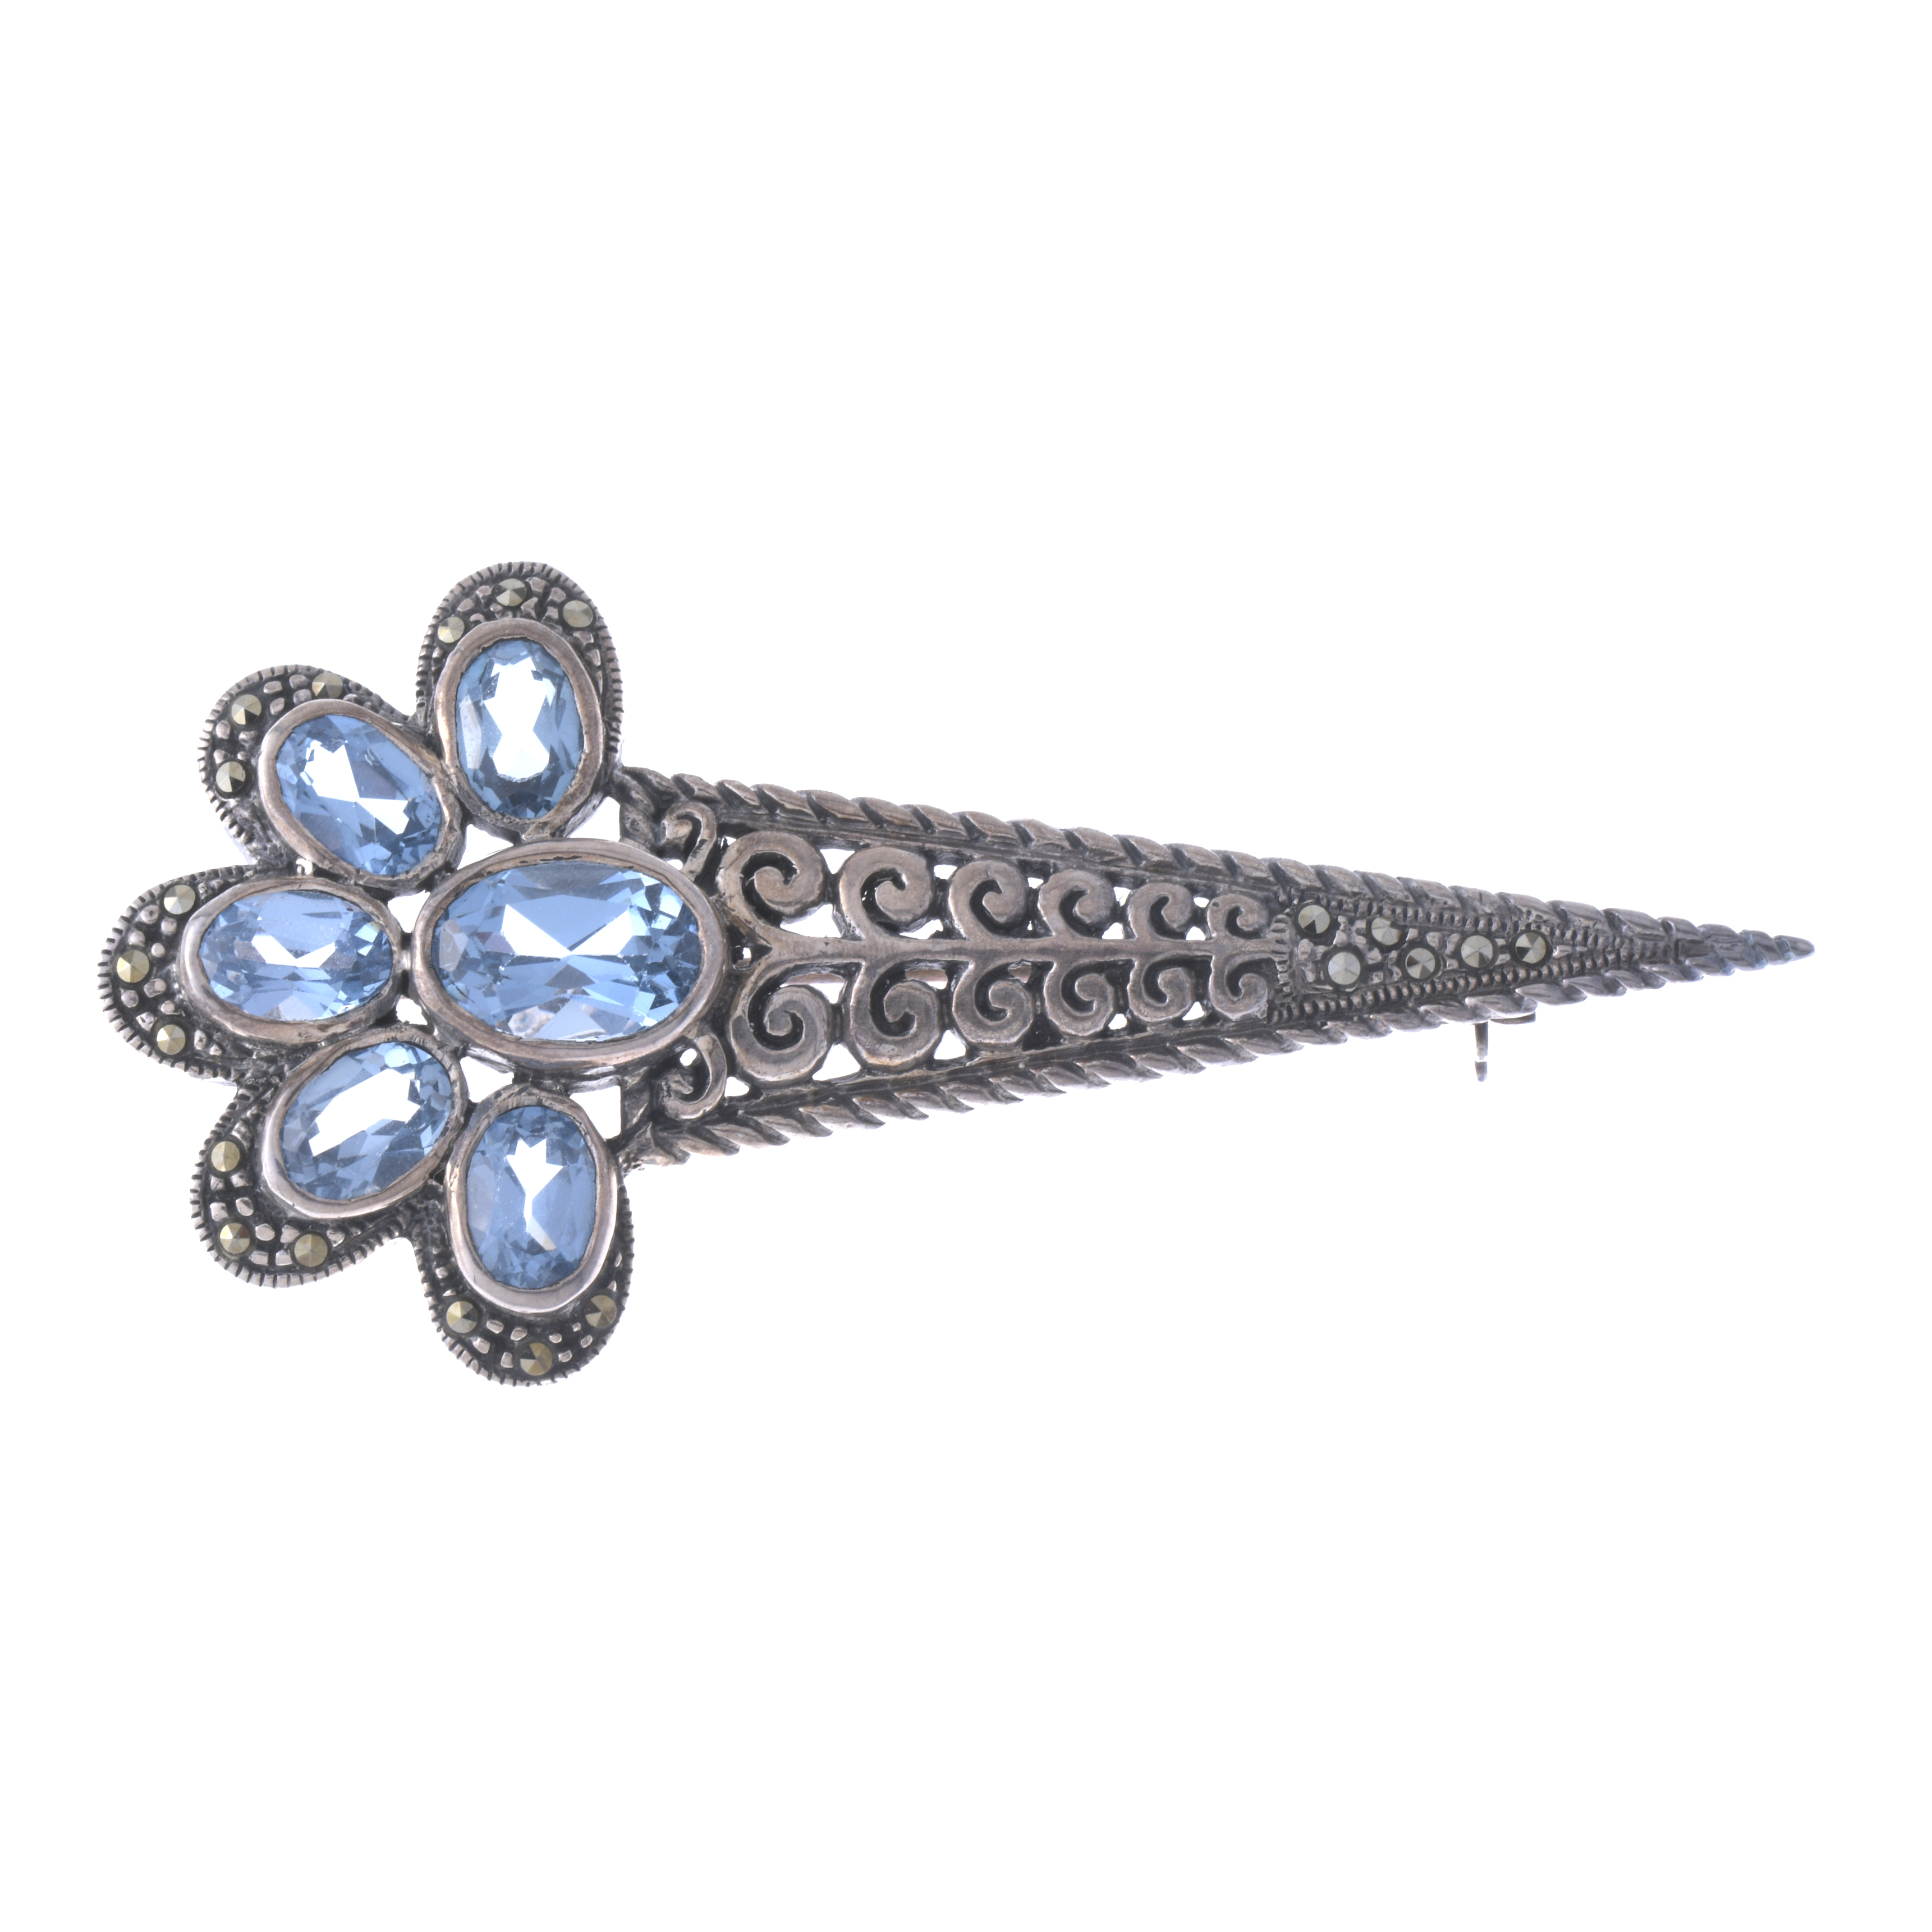 BROOCH WITH MARCASITES AND BLUE SPINEL.